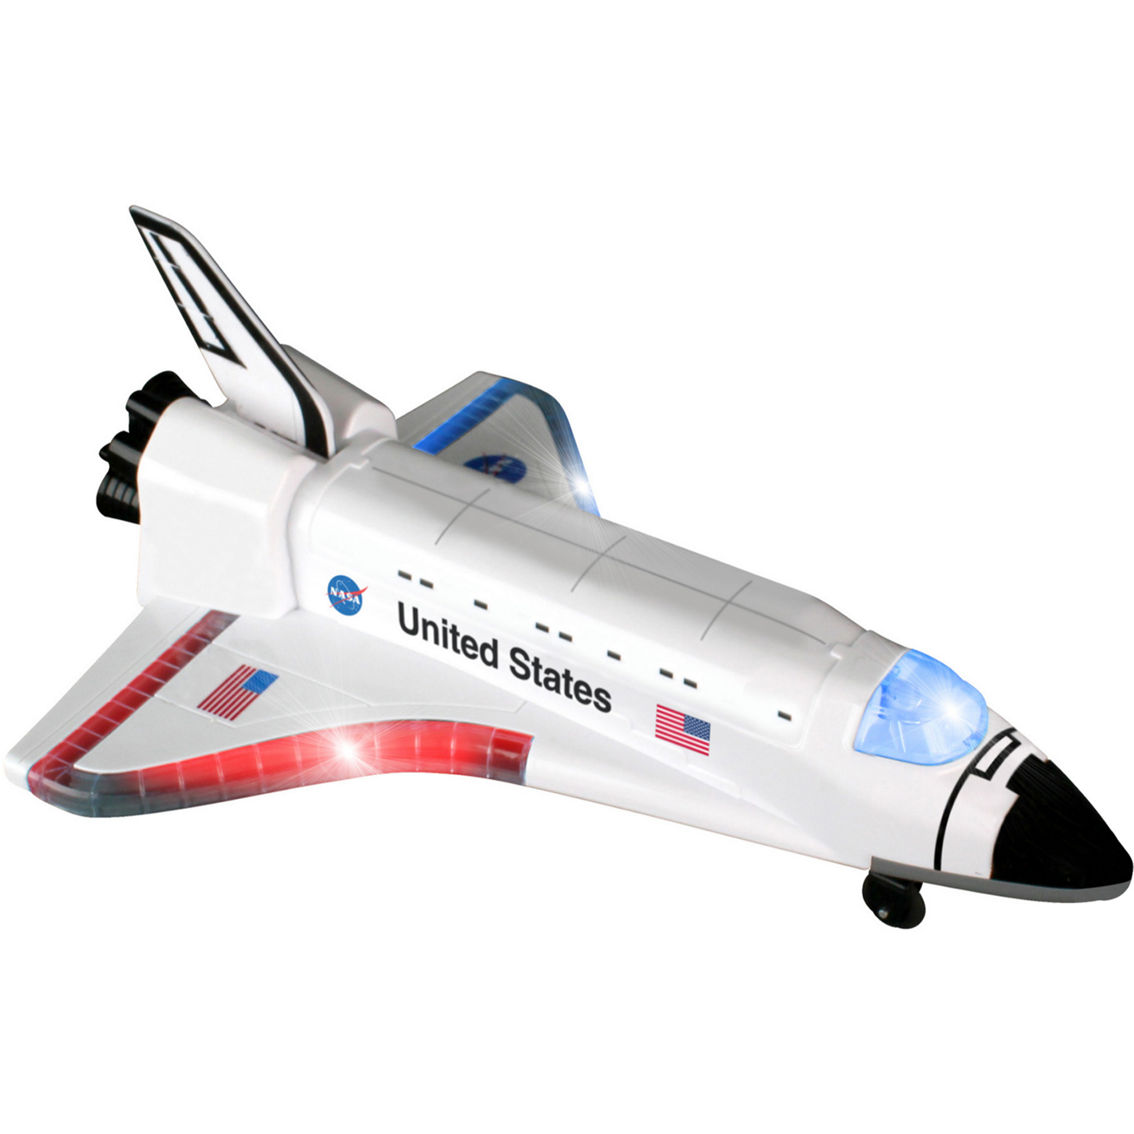 Daron NASA: Space Adventure Radio Controlled Space Shuttle - Image 3 of 4